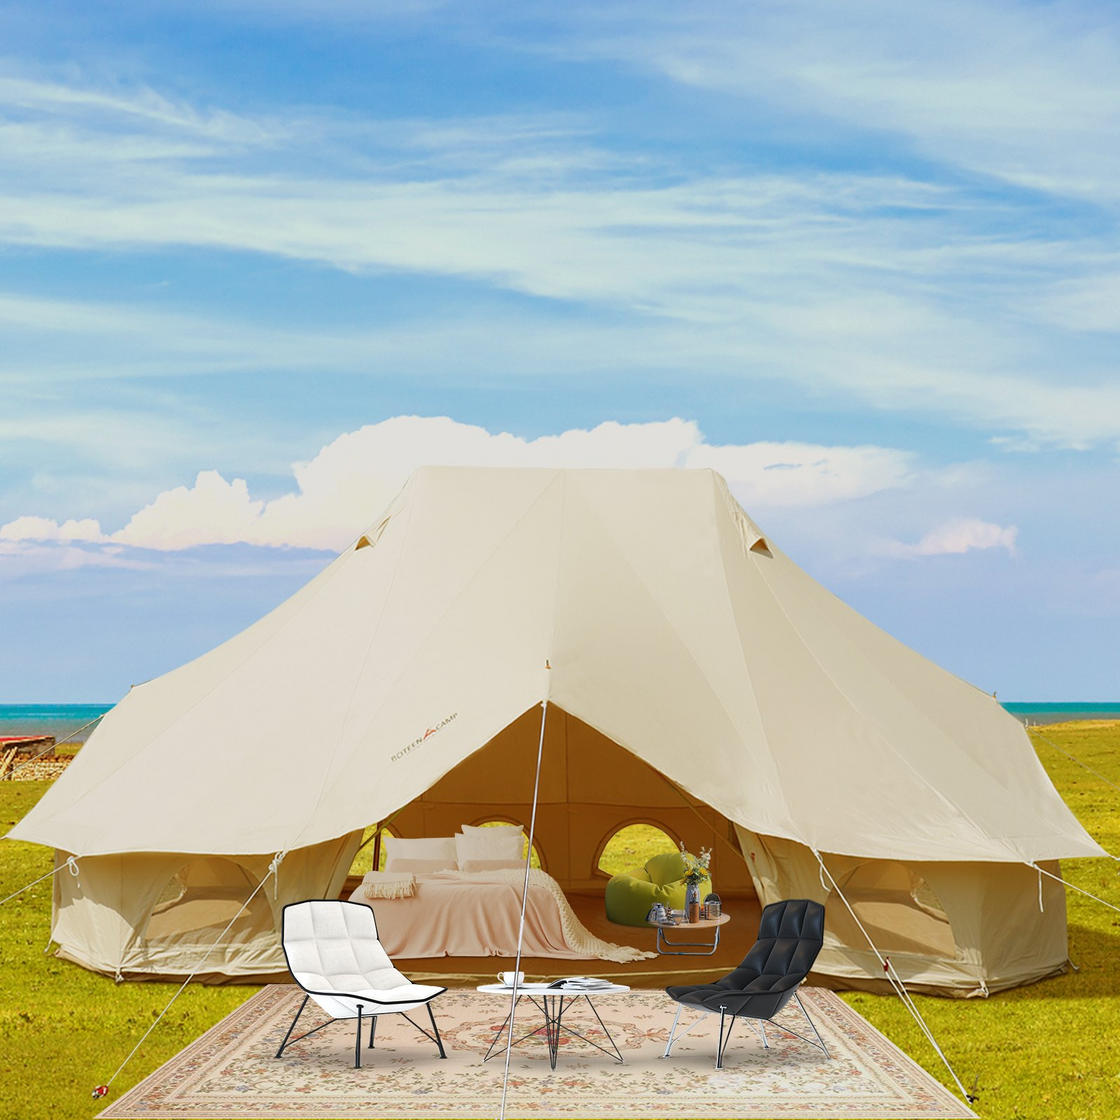 VEVOR 6m Bell Tent 19.7x13.1x9.8 ft Yurt Beige Canvas Tent Cotton Glamping Tents 8-12 Person 4 Season Teepee Tent Portable for Adults Luxury Safari Tent for Family Outdoor Camping Lightweight